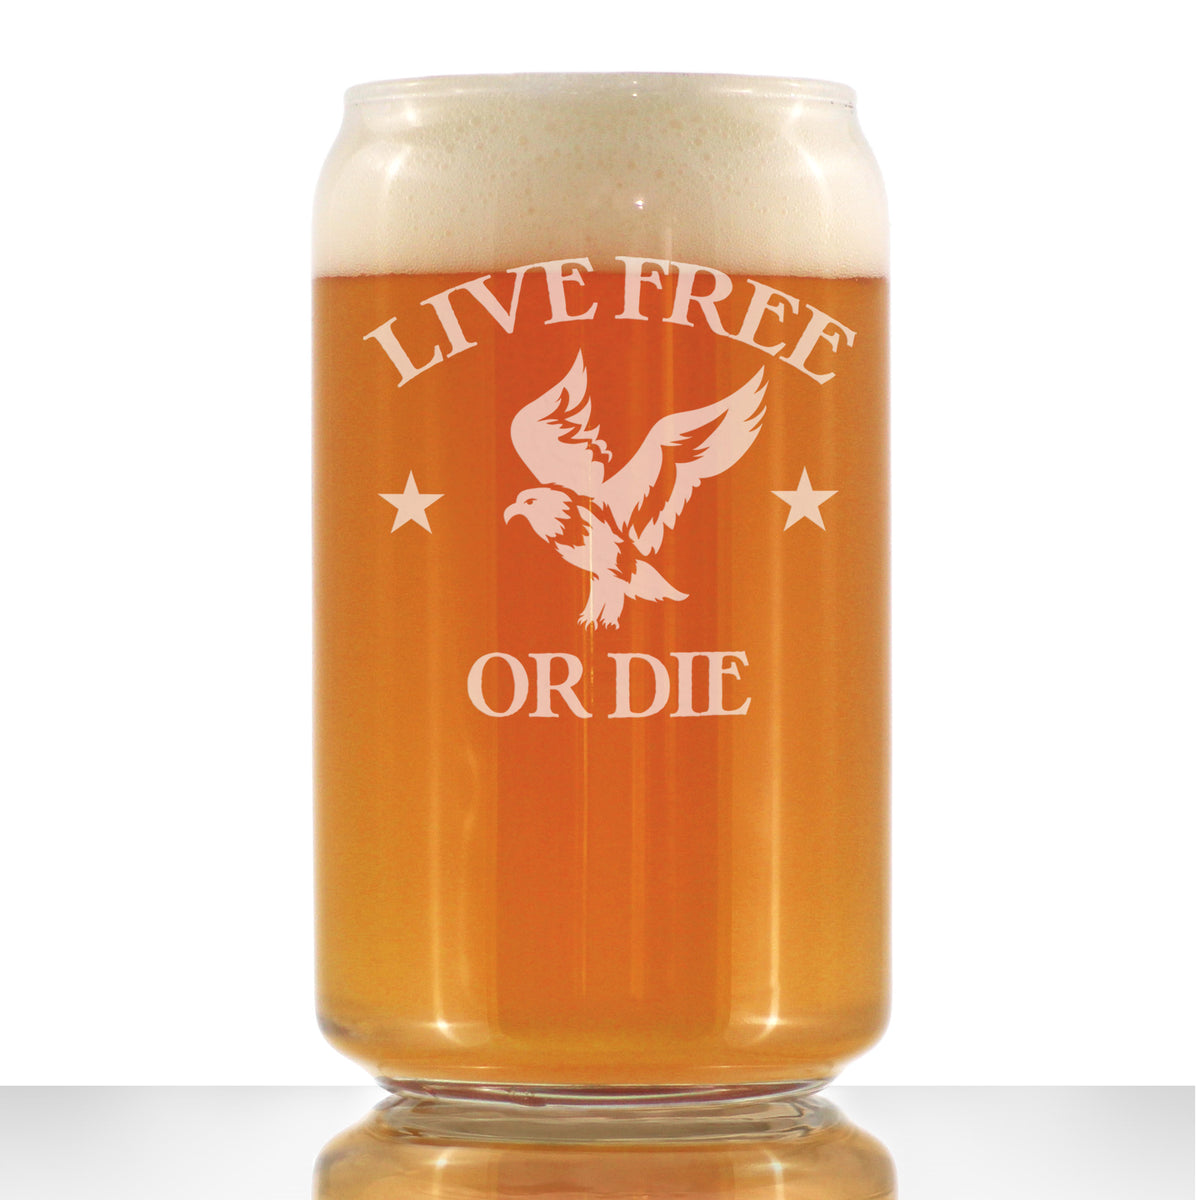 Live Free Or Die - American Patriotic Beer Can Pint Glass Gift for Men &amp; Women - 16 oz Drinking Glasses